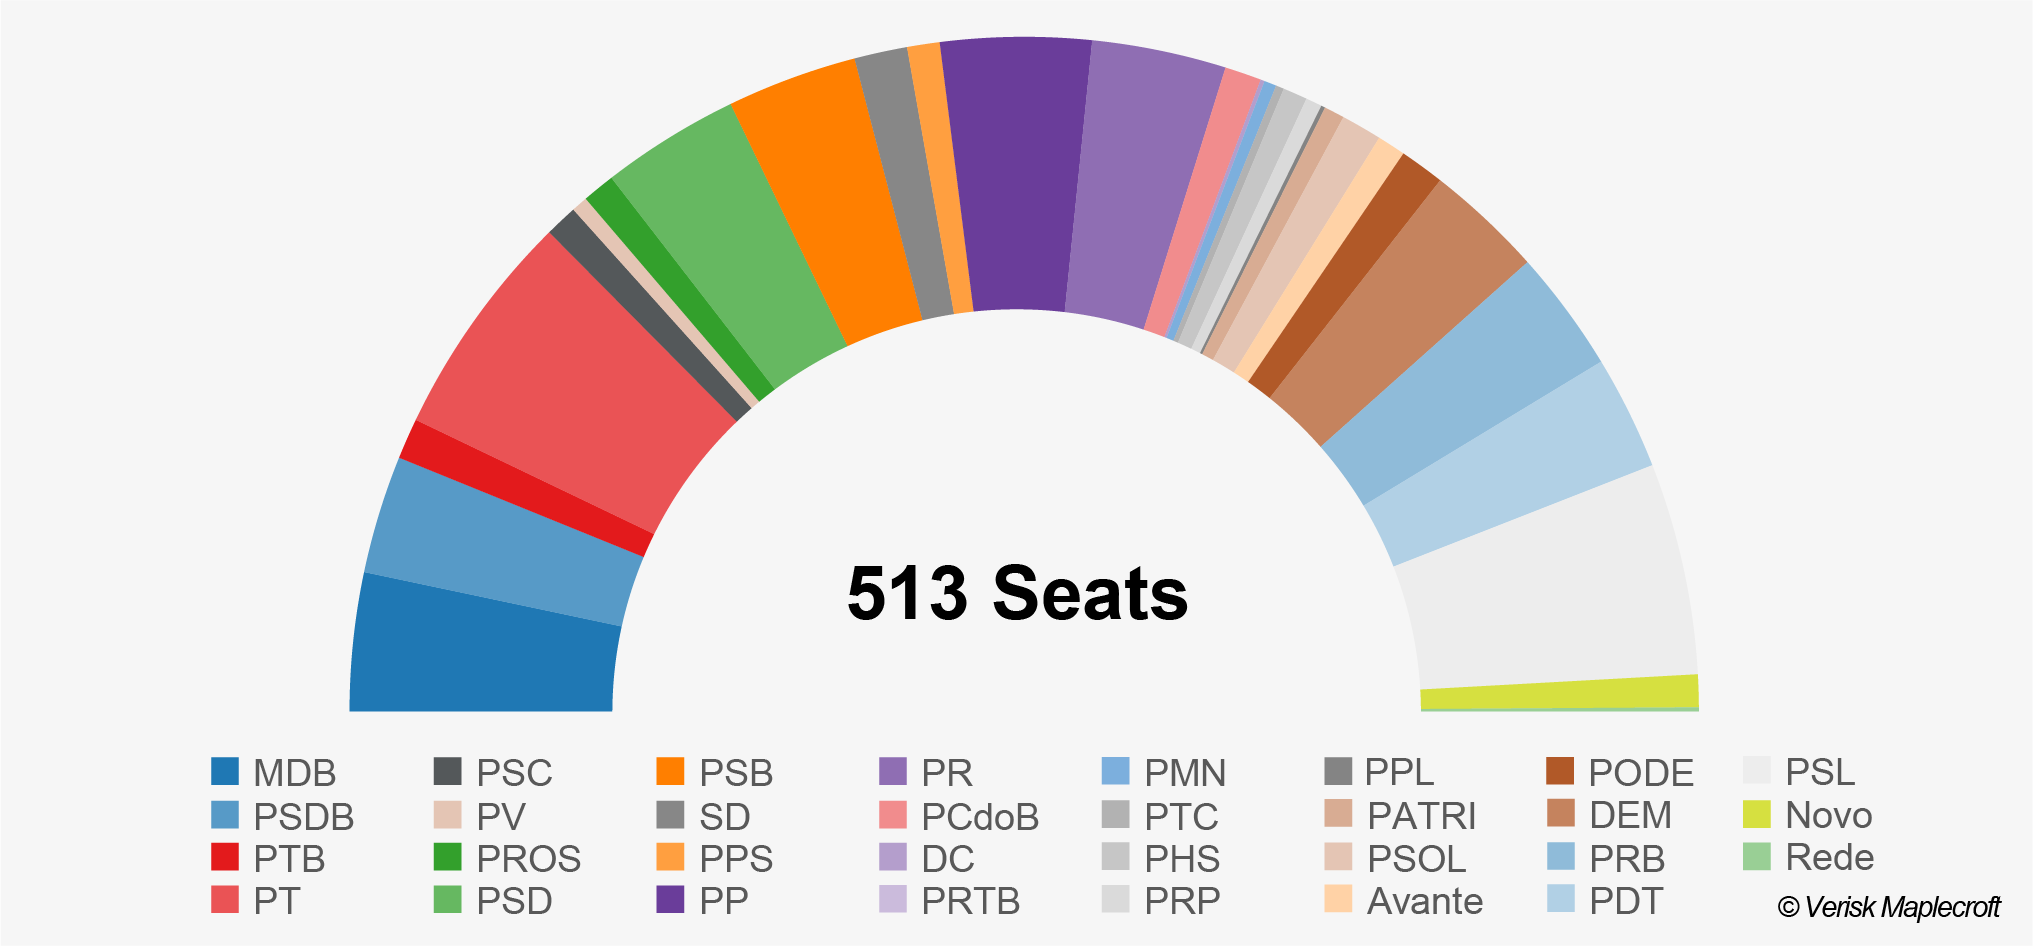 Political Landscape In Brazil: Composition Of The Chamber Of Deputies, 2019